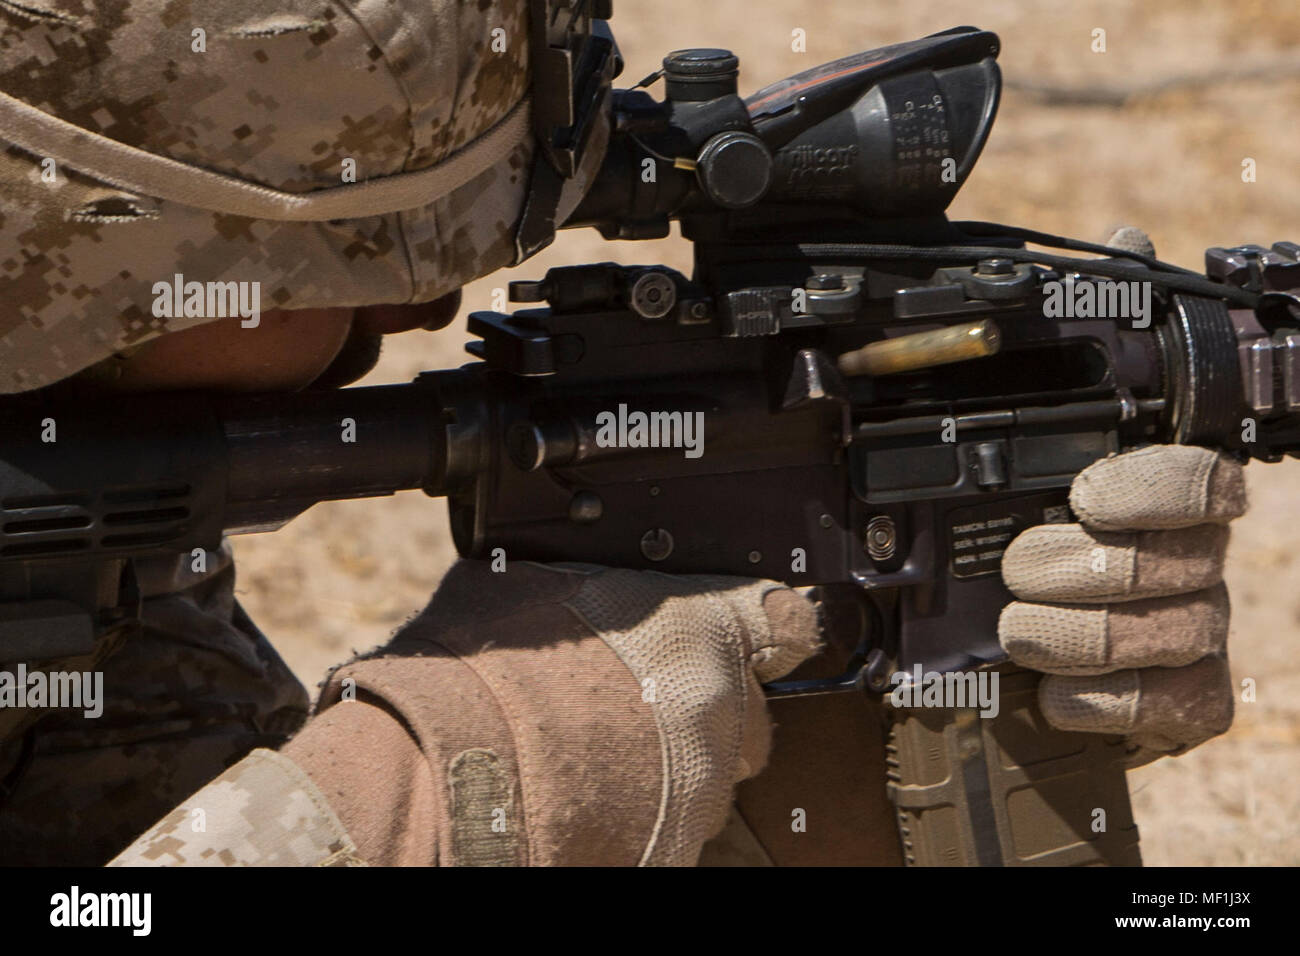 A U.S. Marine with India Company, 3rd Battalion, 2nd Marine Regiment, 2nd Marine Division, sends rounds down range during Integrated Training Exercise (ITX) 3-18 aboard the Marine Corps Air Ground Combat Center, Twentynine Palms, Calif., April 18, 2018. The purpose of ITX 3-18 is to create a challenging, realistic training environment that produces combat-ready forces capable of operating as an integrated Marine Air Ground Task Force. (U.S. Marine Corps photo by Pfc. Nathaniel Q. Hamilton) Stock Photo